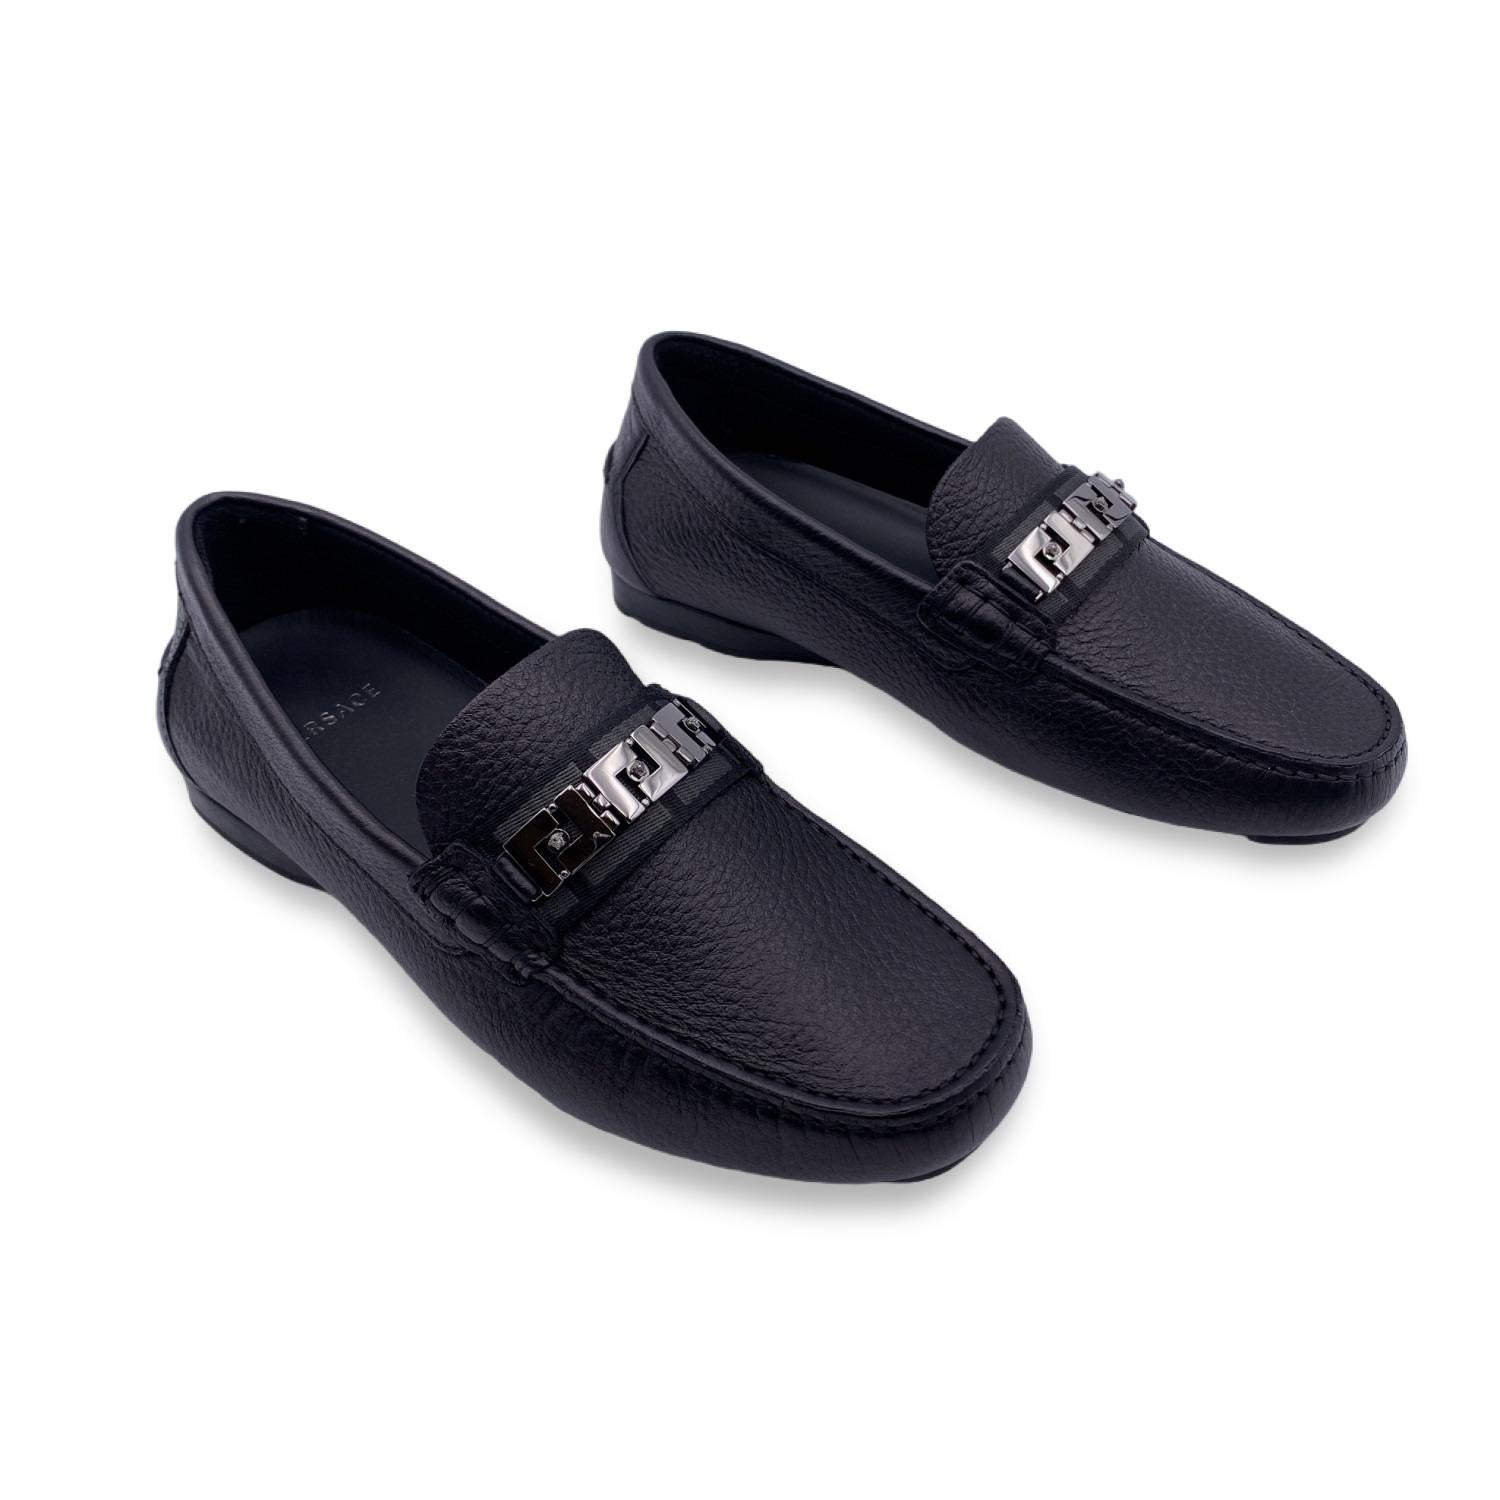 Beautiful Versace car shoes. Crafted in black leather with rutenio greek and Medusa detailing on top. They feature a round toe and slip-on design. Rubber sole. Made in Italy. Size: EU 38.5 (The size shown for this item is the size indicated by the